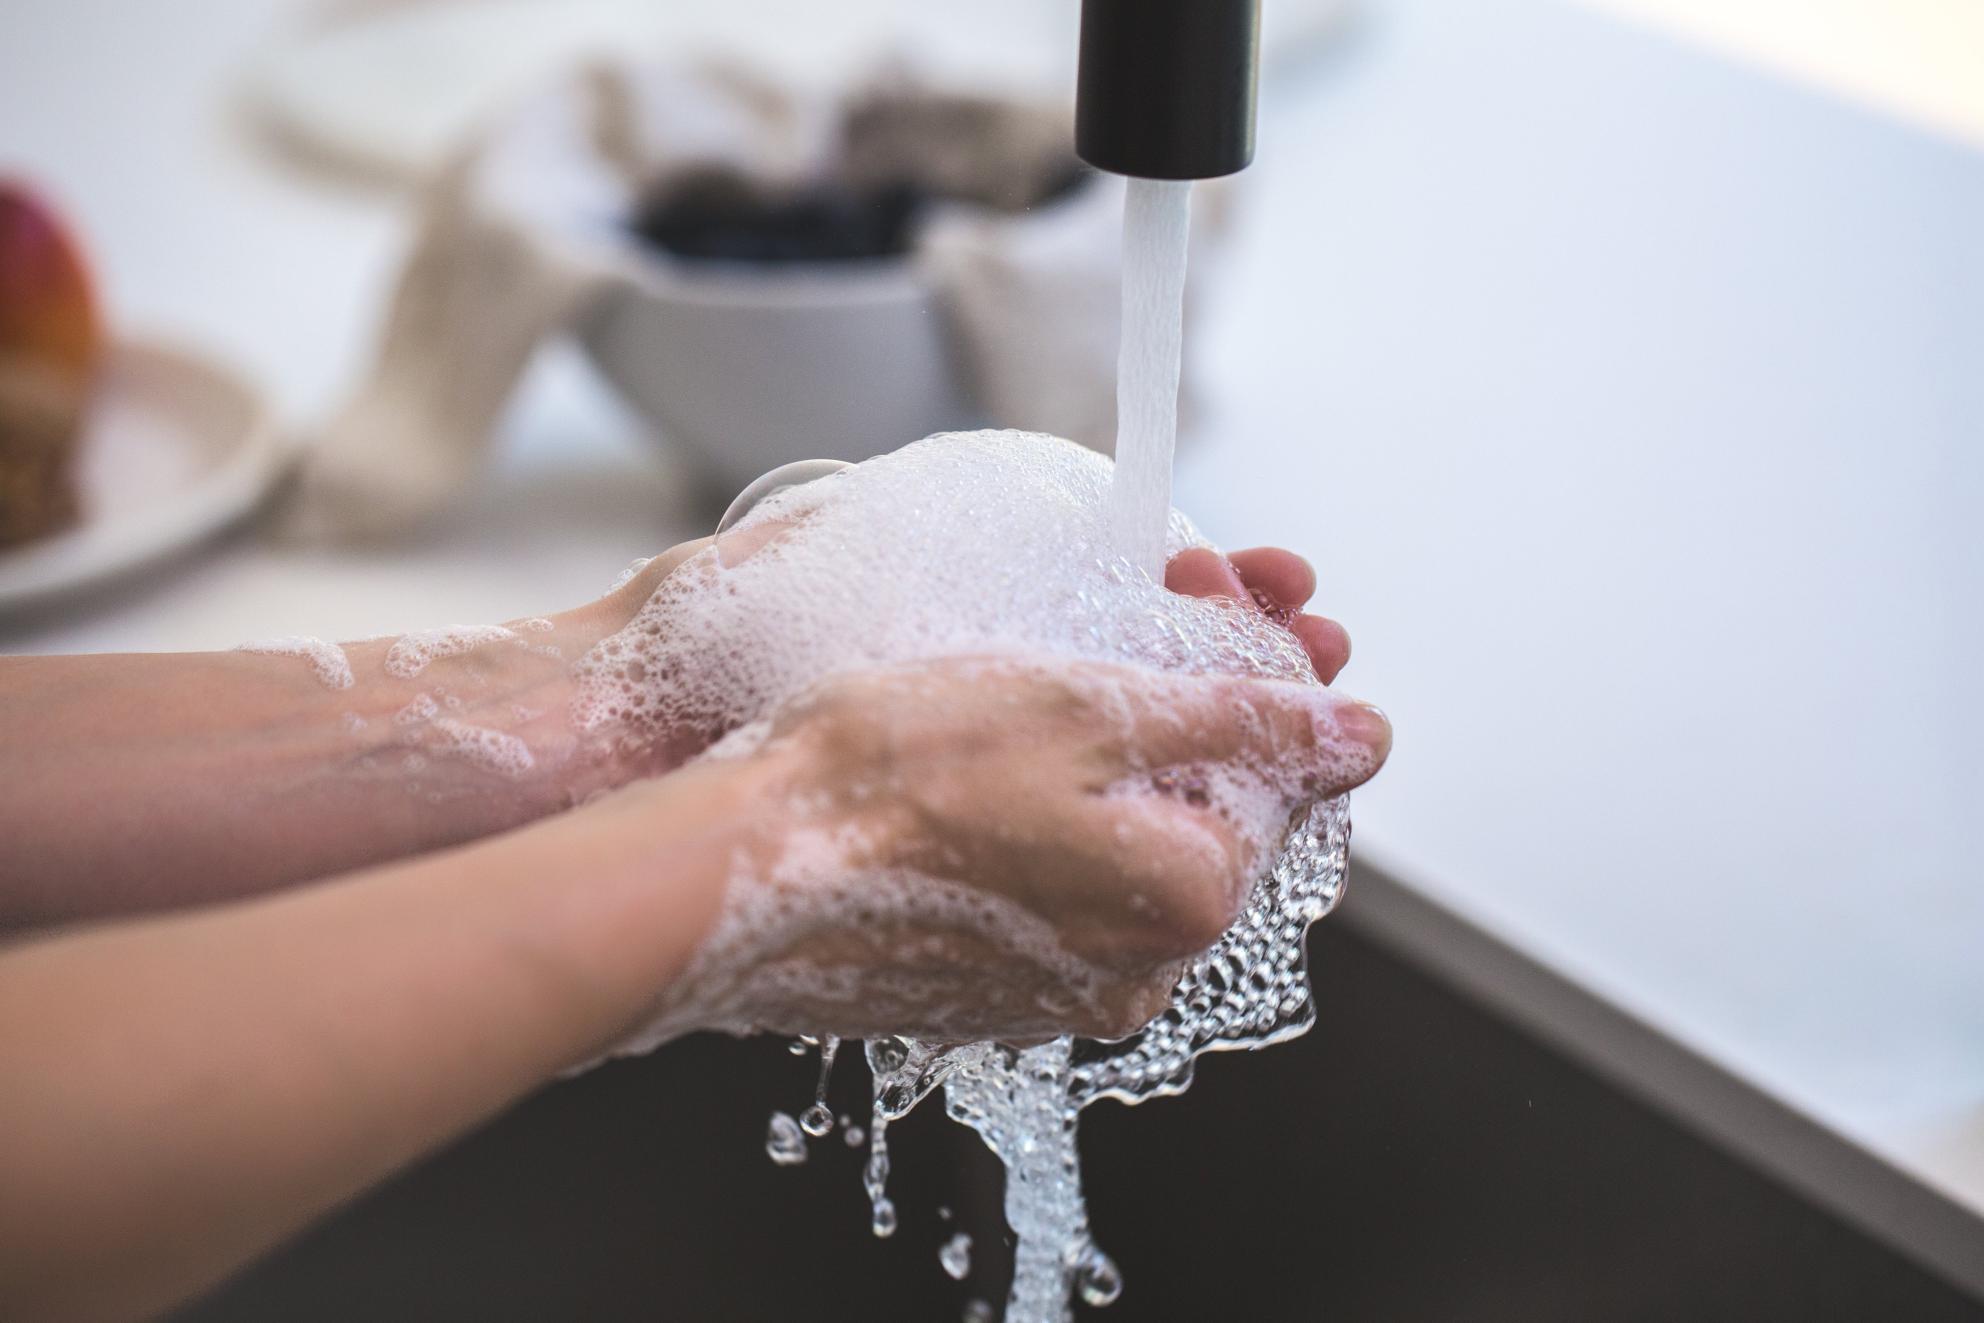 hands under faucet washing